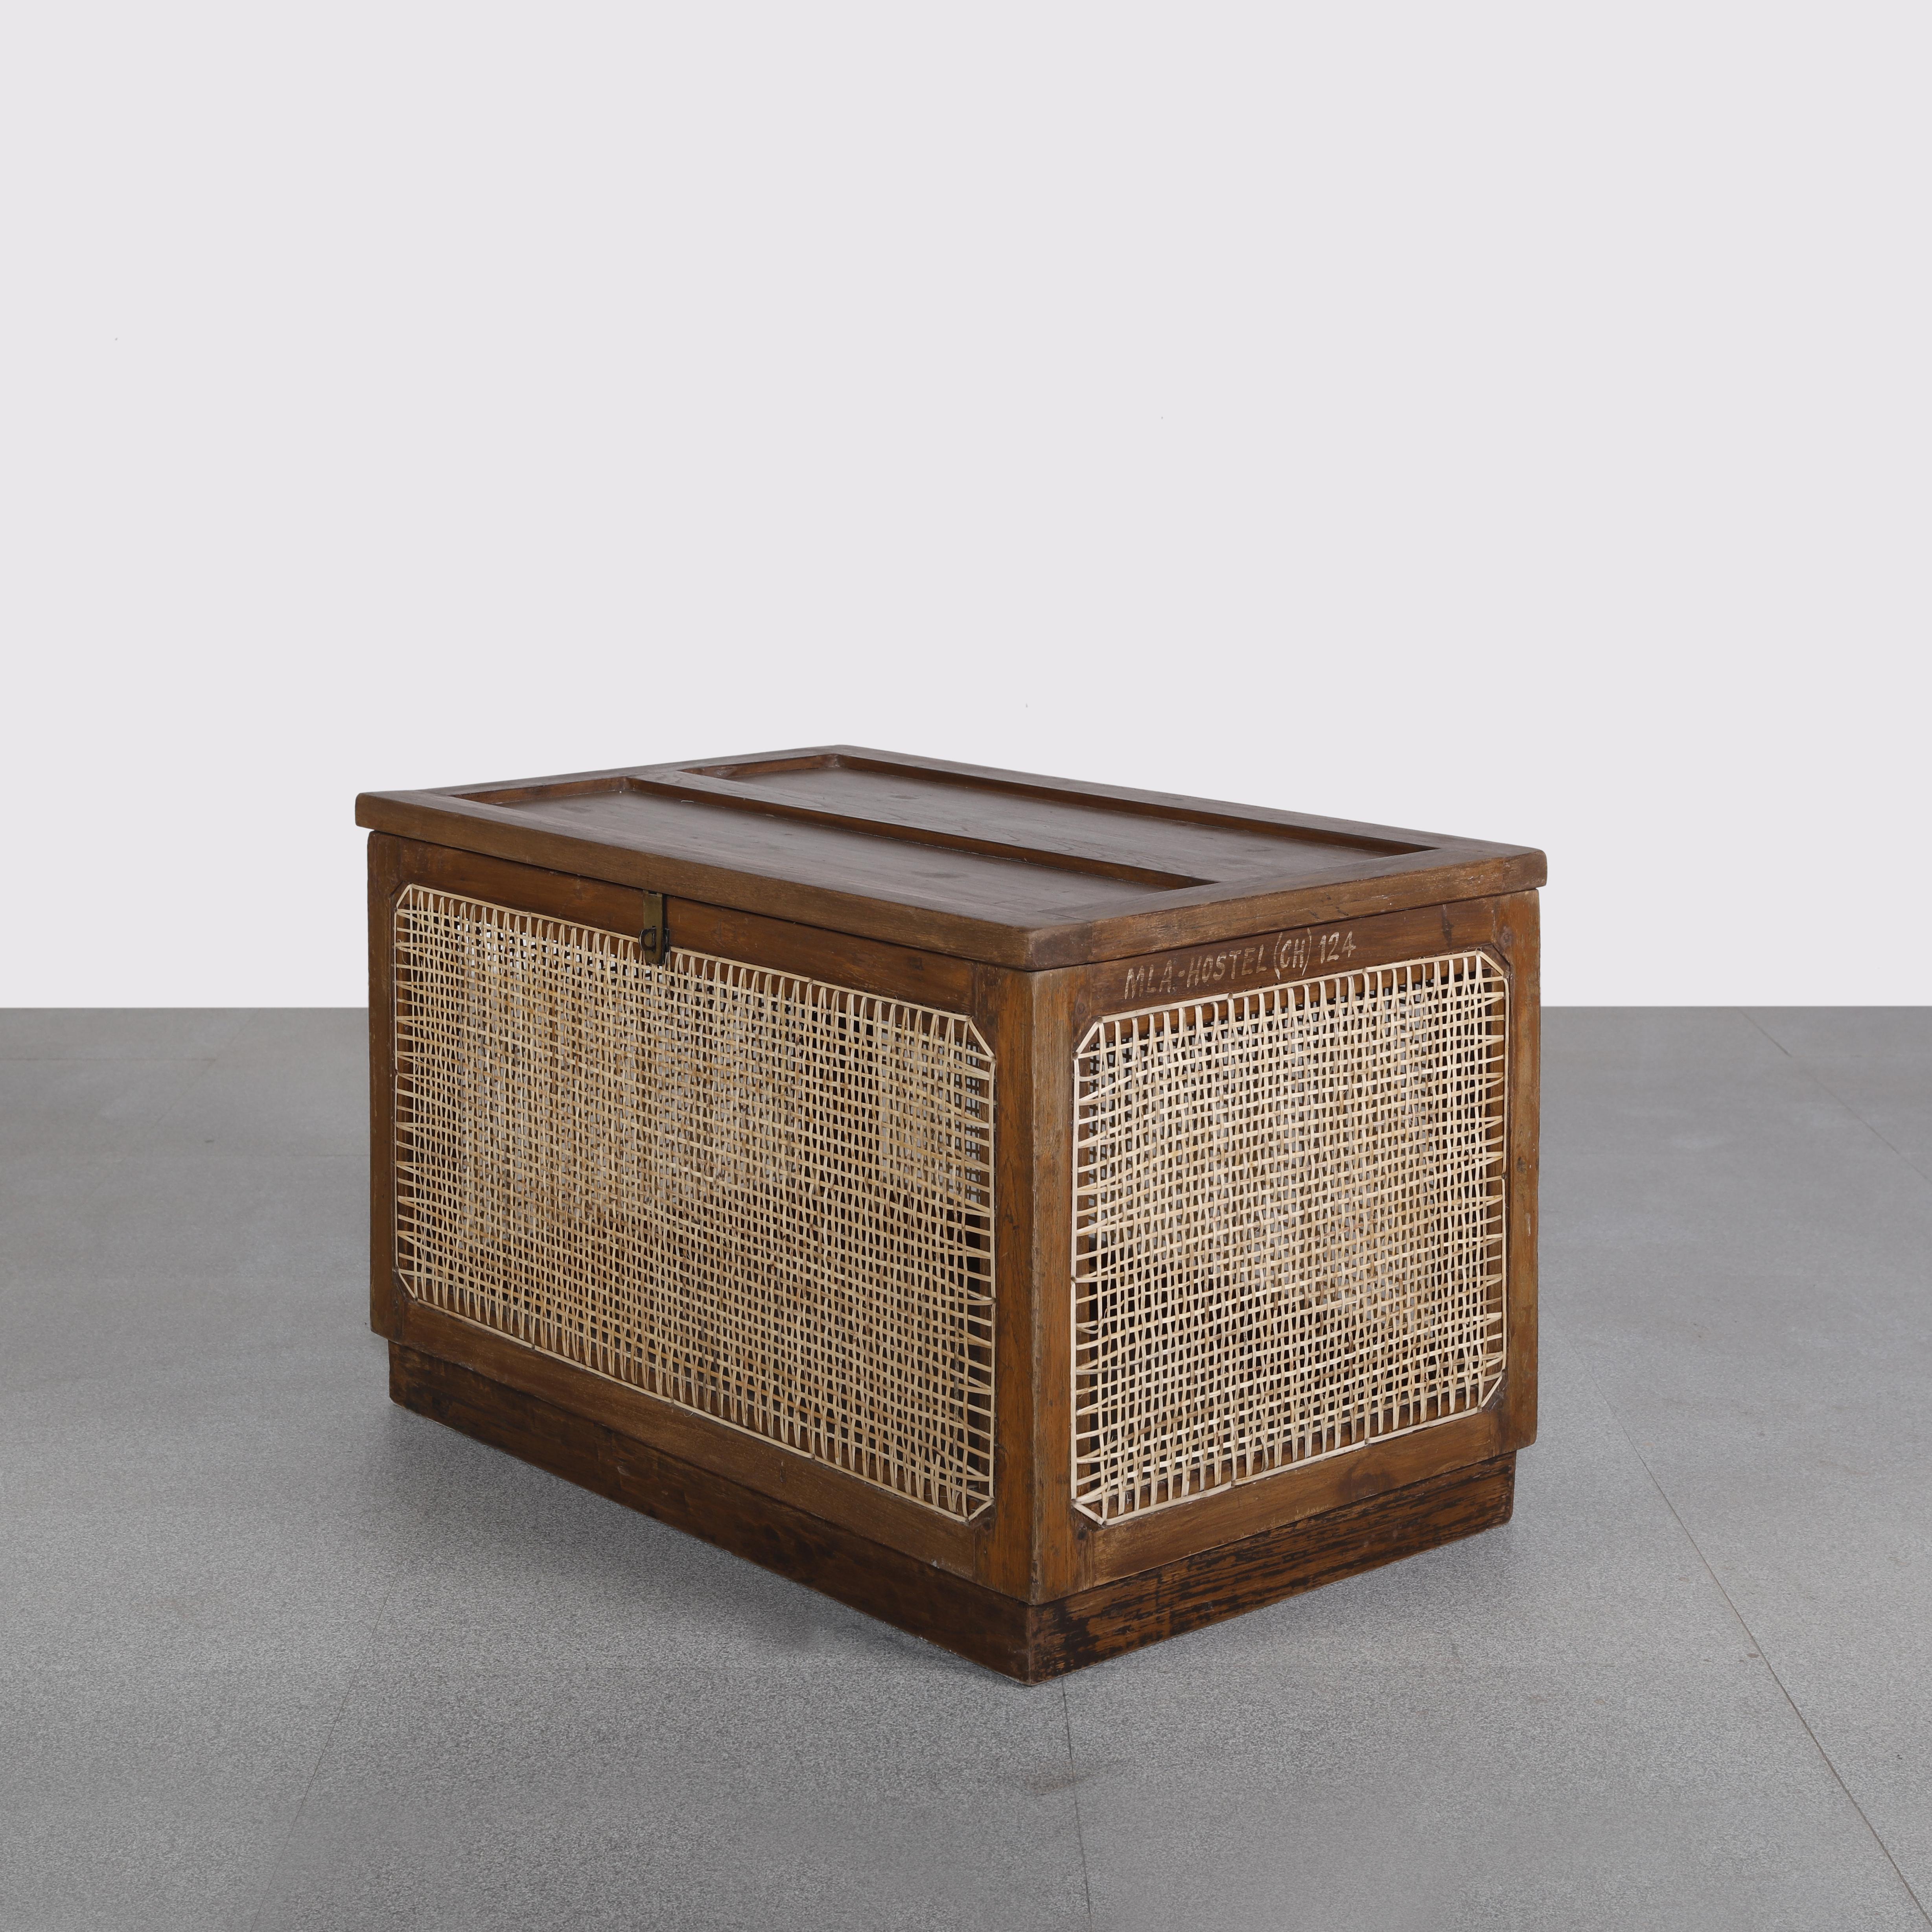 This box is such a magical object. It is nicely detailed and has wonderful proportions. Finally, it’s designed as clothing chest. I love to use it as a side table, little coffee table or simply as an object in a room. It brings a beautiful